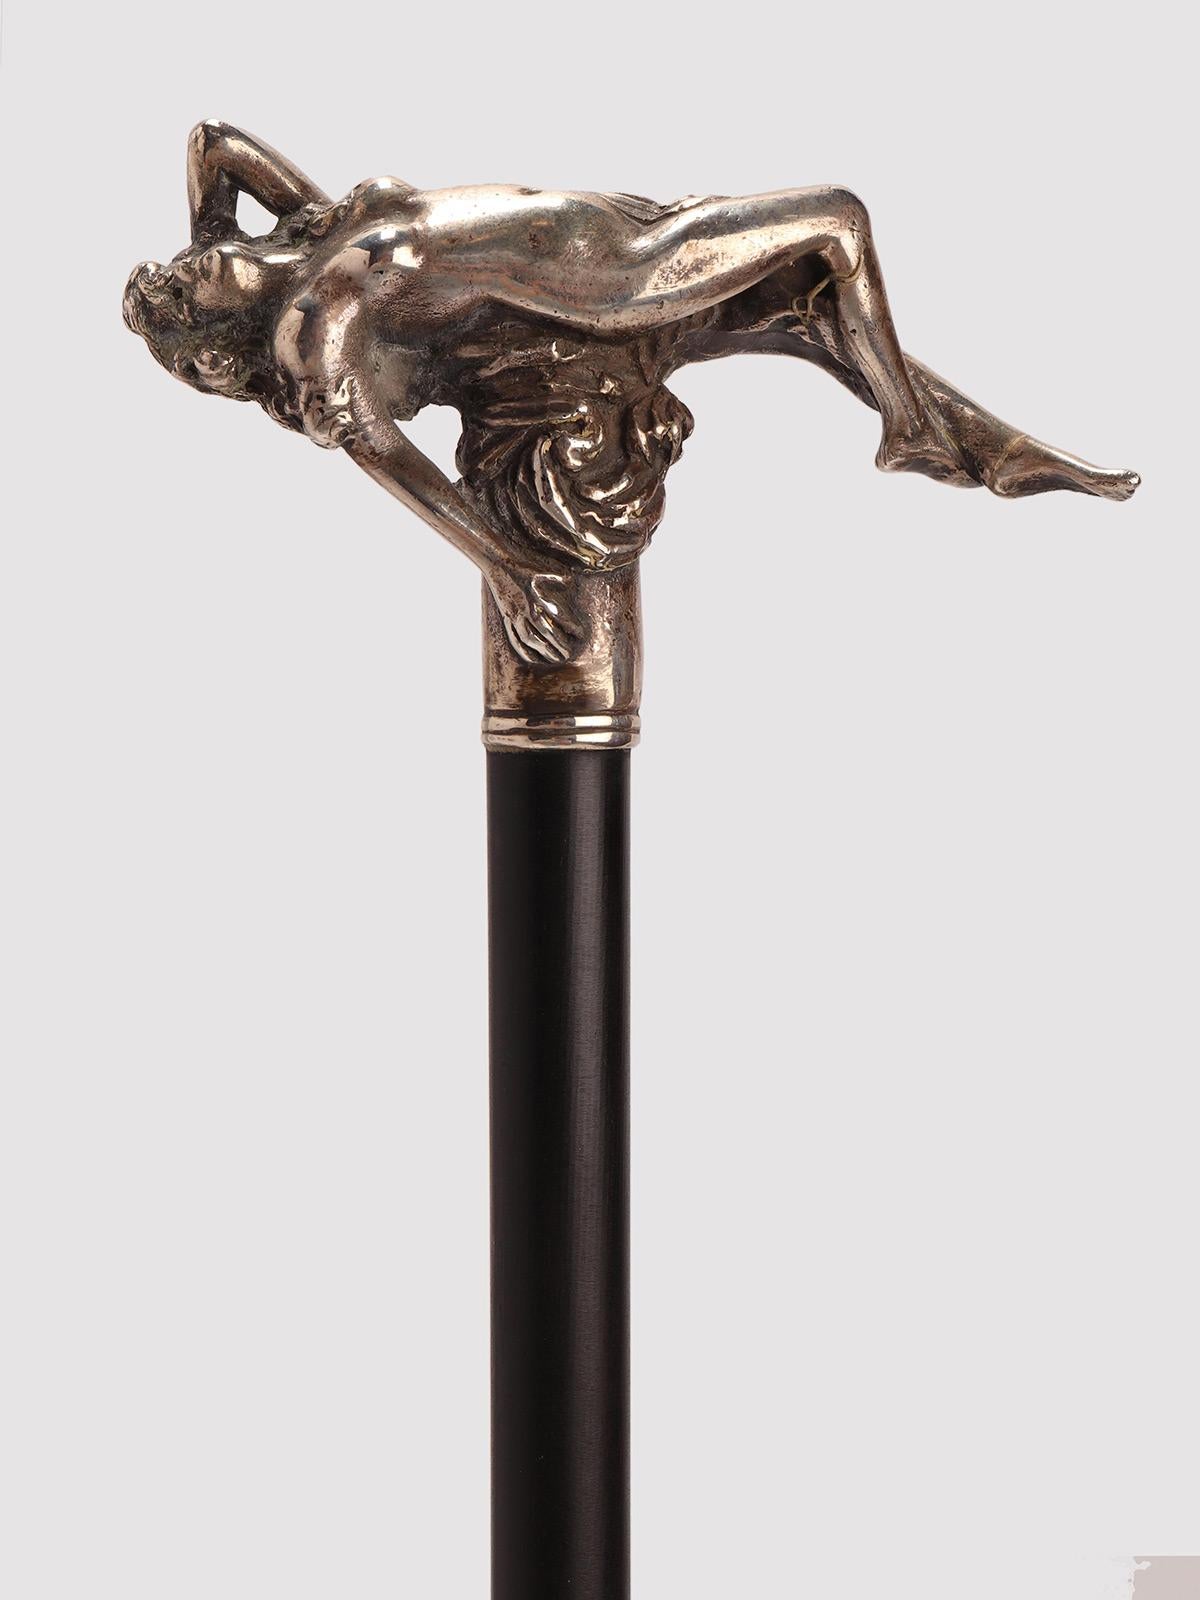 Walking stick: Liberty knob in 800/1000 silver. The knob depicts the figure of a reclining naked woman in the round. Solid ebony wood shaft. Metal tip. Germany circa 1900.